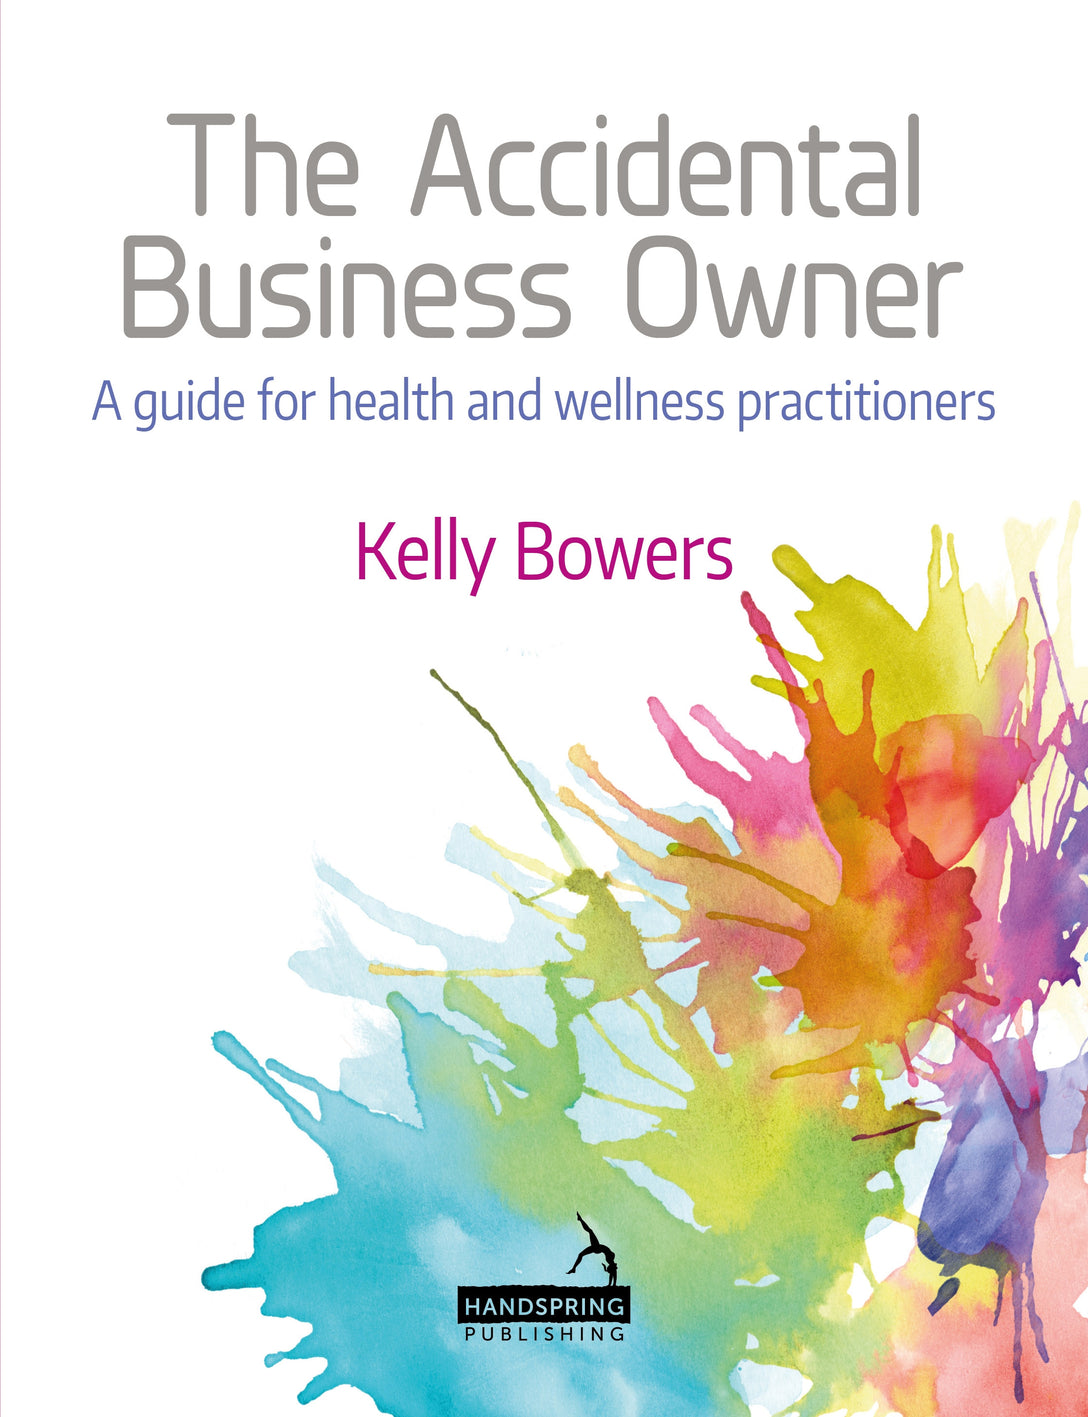 The Accidental Business Owner - A Friendly Guide to Success for Health and Wellness Practitioners by Kelly Bowers